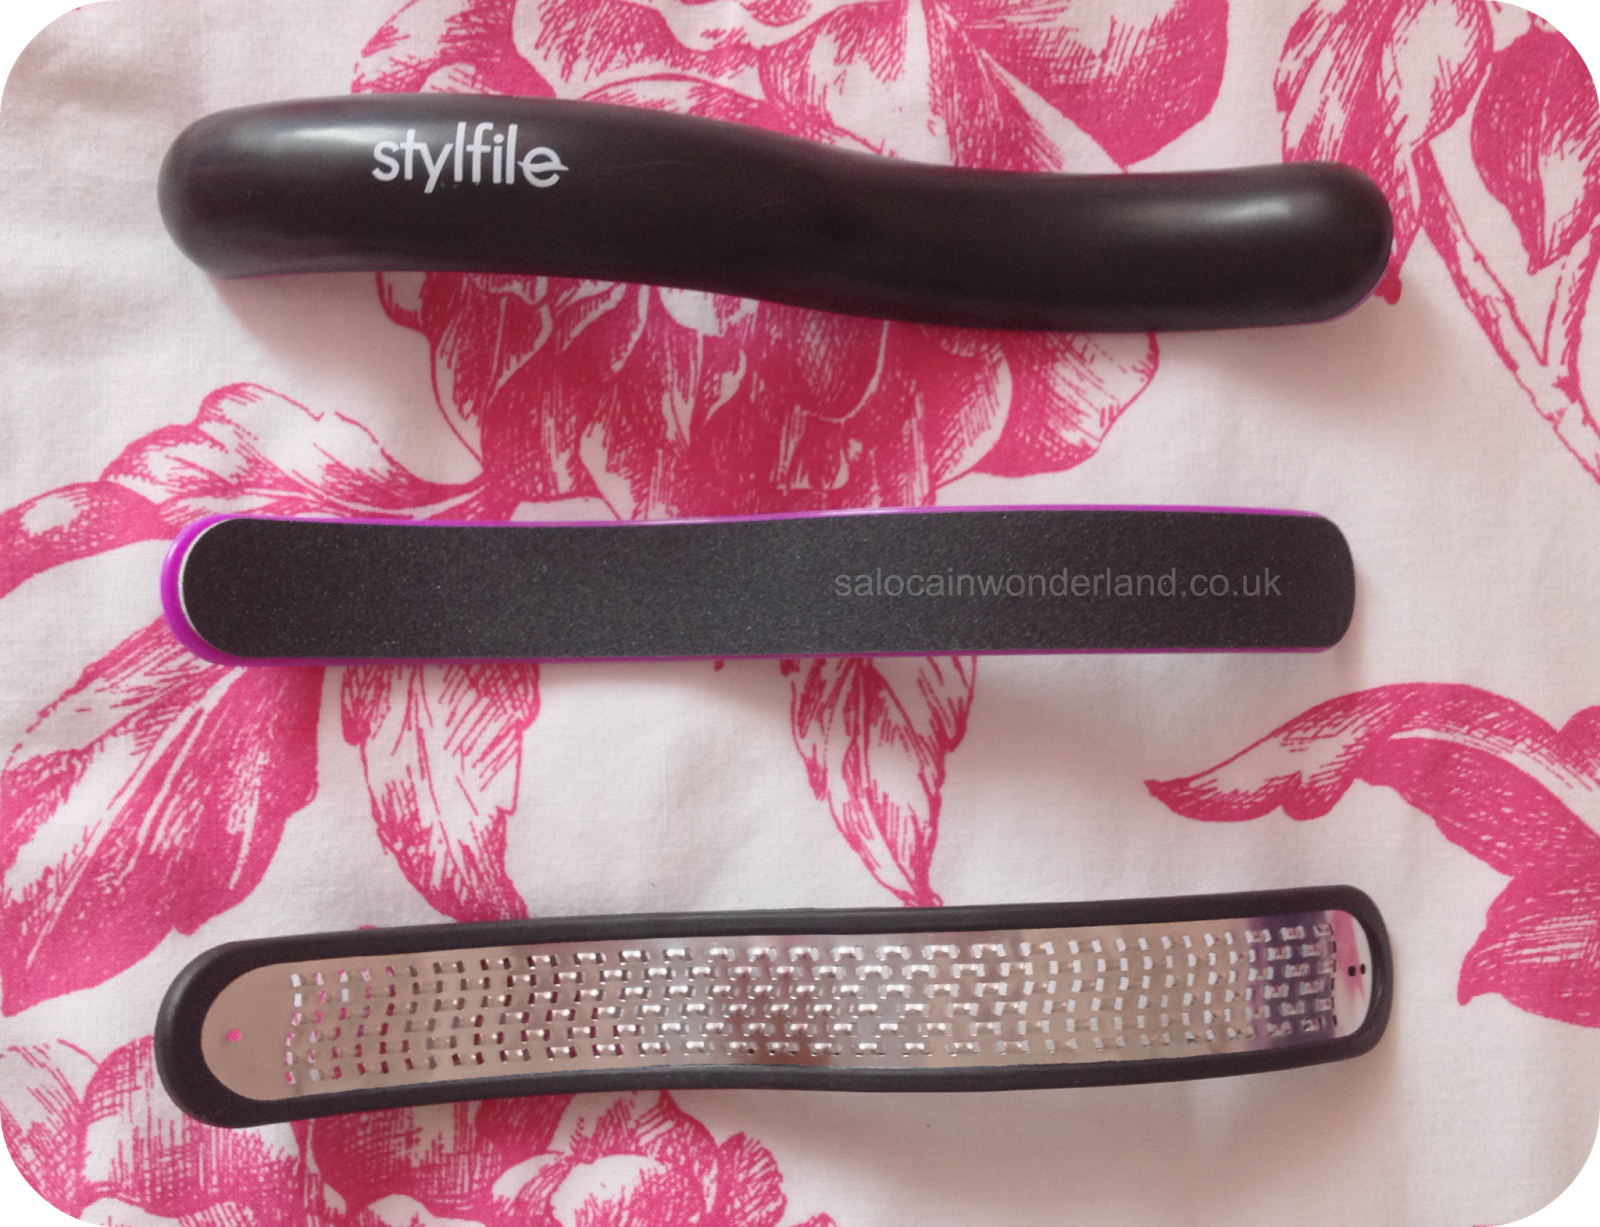 s-ped stylfile review